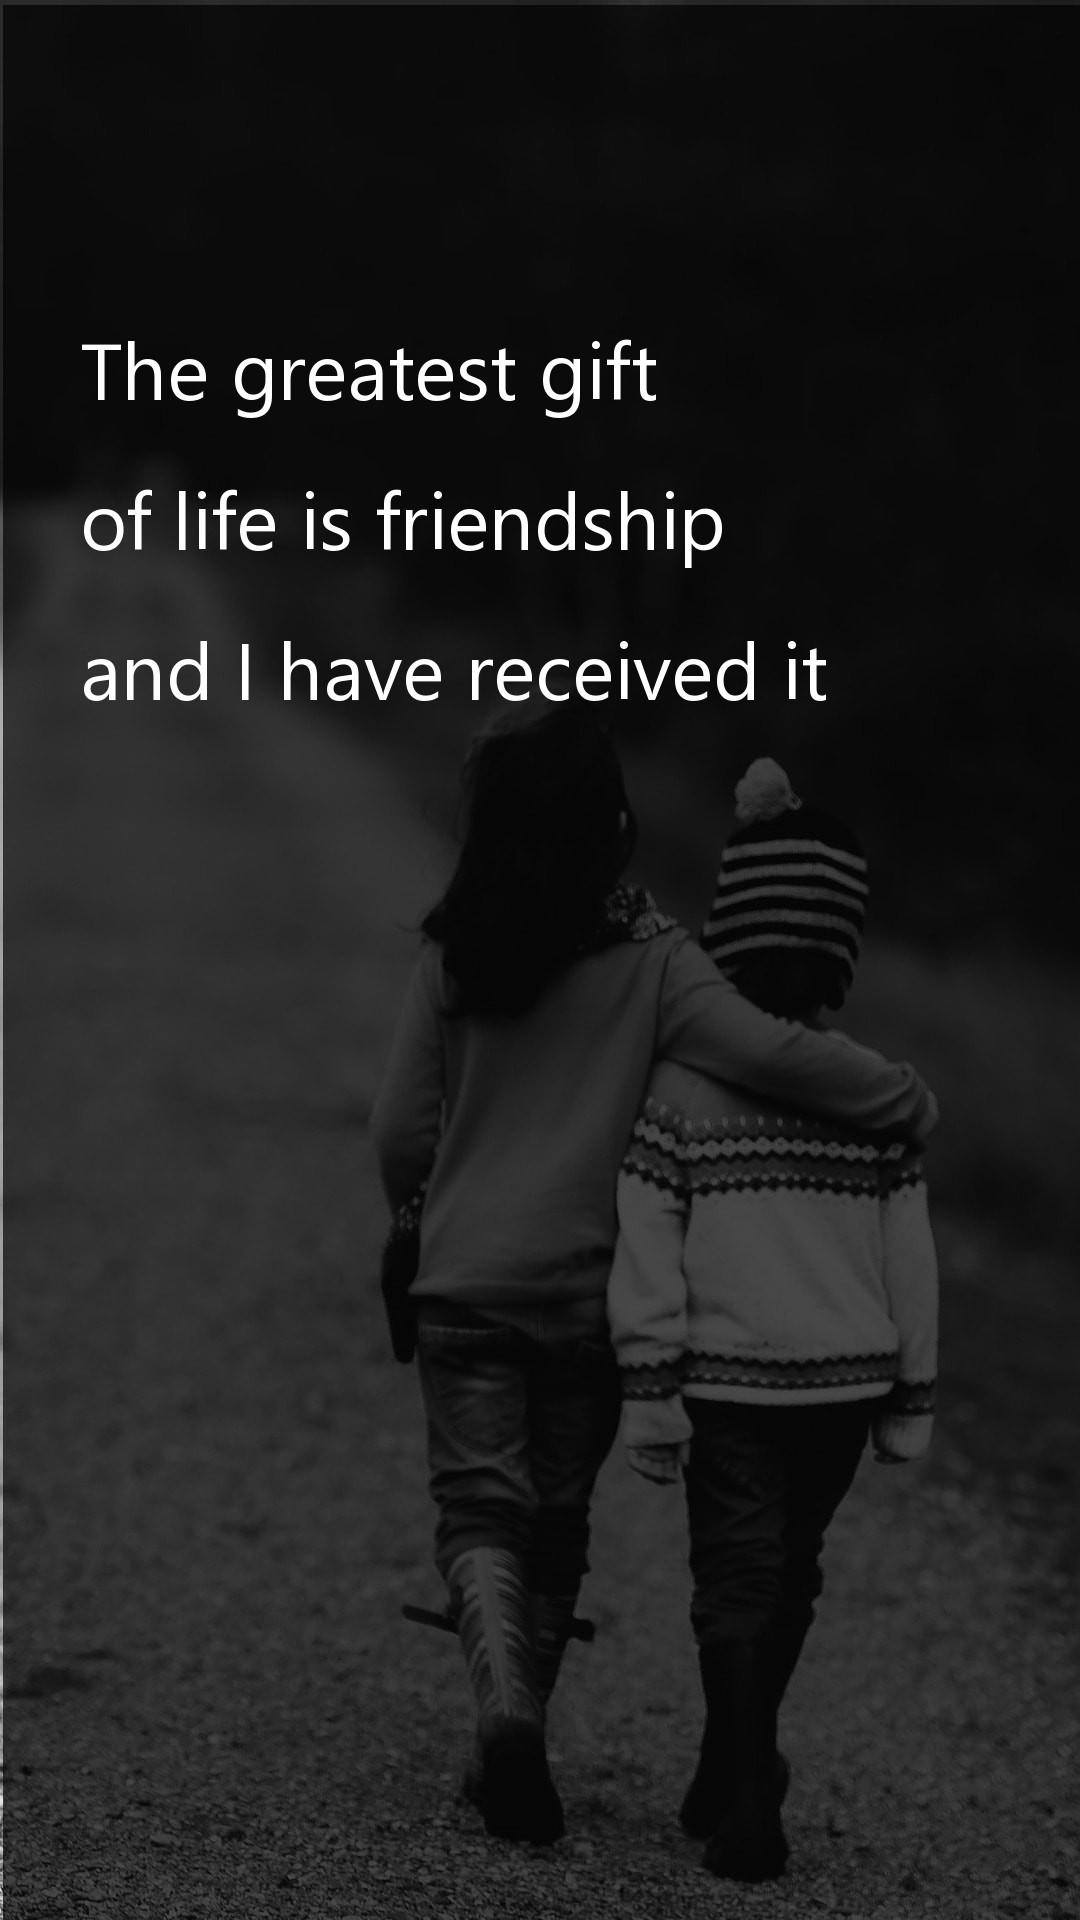 The greatest gift of life Friendship Quotes at statush.com